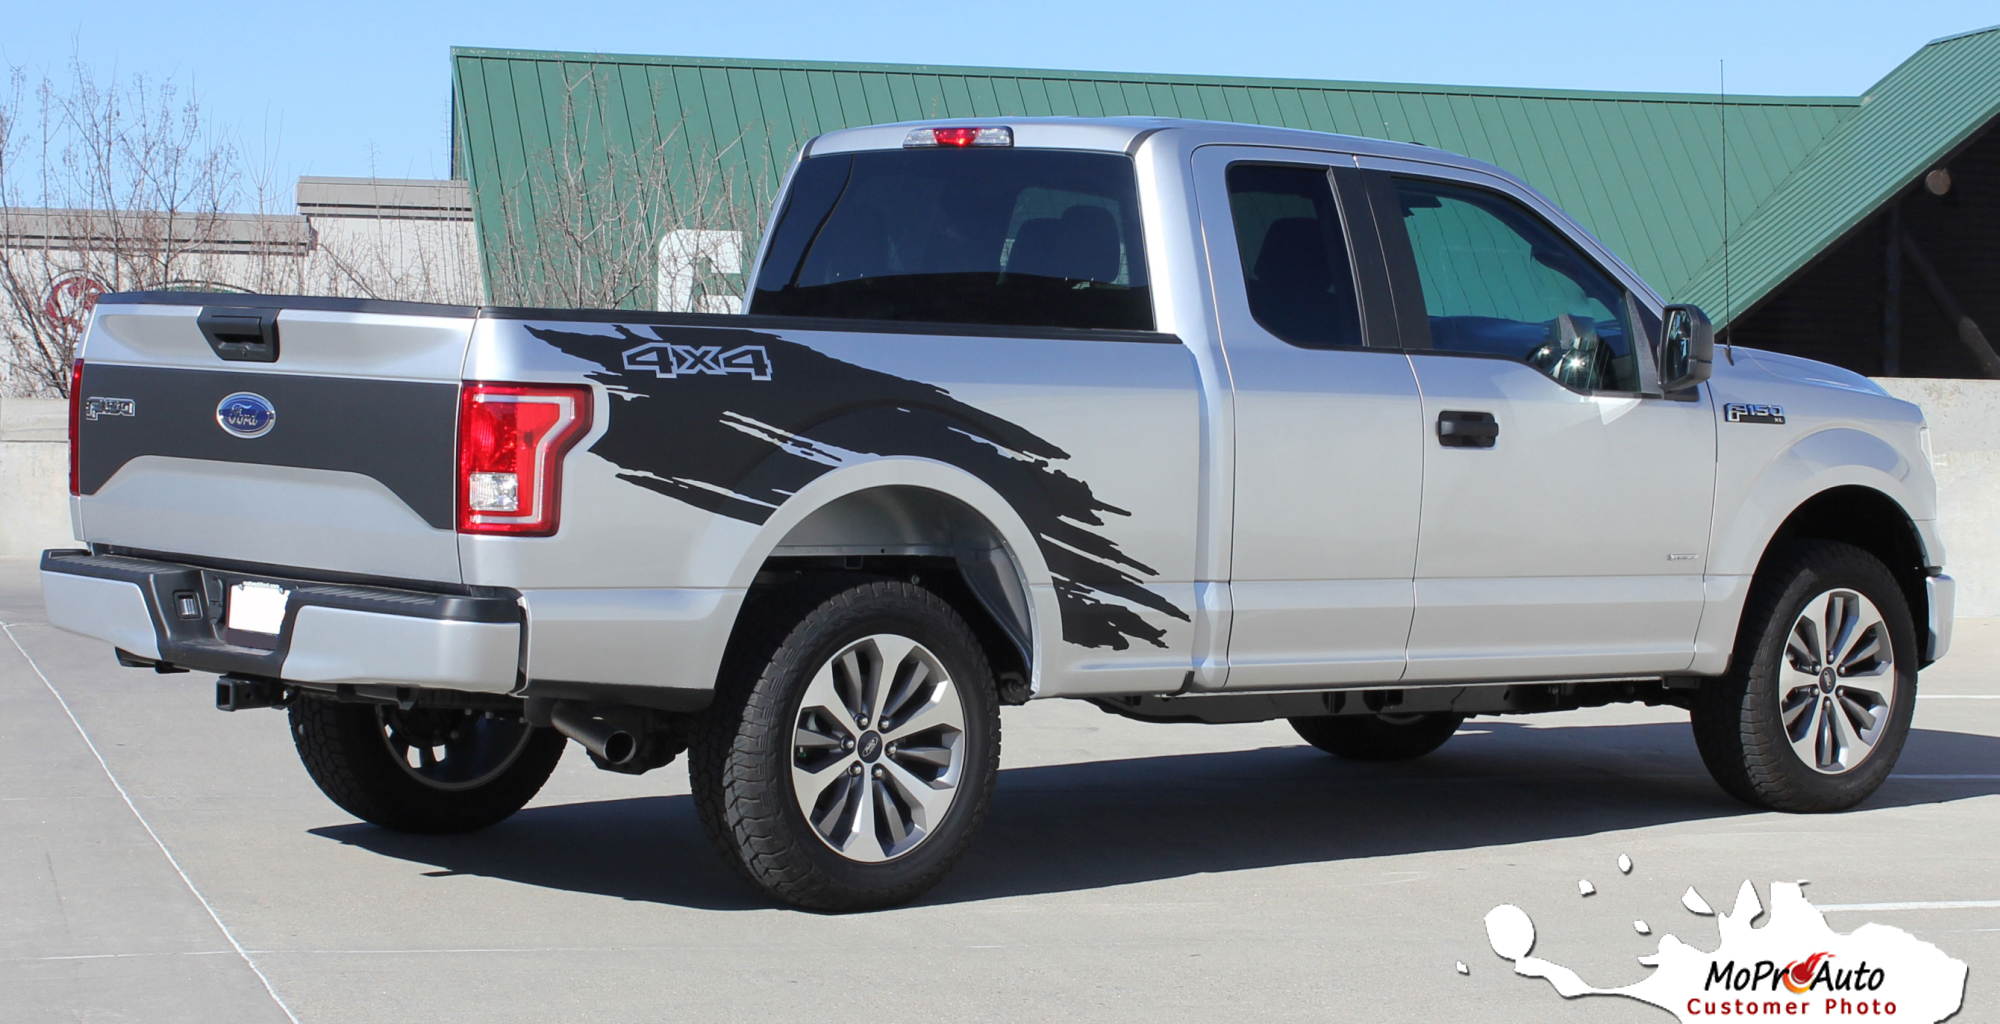 TORN MUDSLINGER Truck Bed Ford F-Series F-150 2015, 2016, 2017, 2018, 2019, 2020 Appearance Package Vinyl Graphics and Decals Kit - Customer Photo